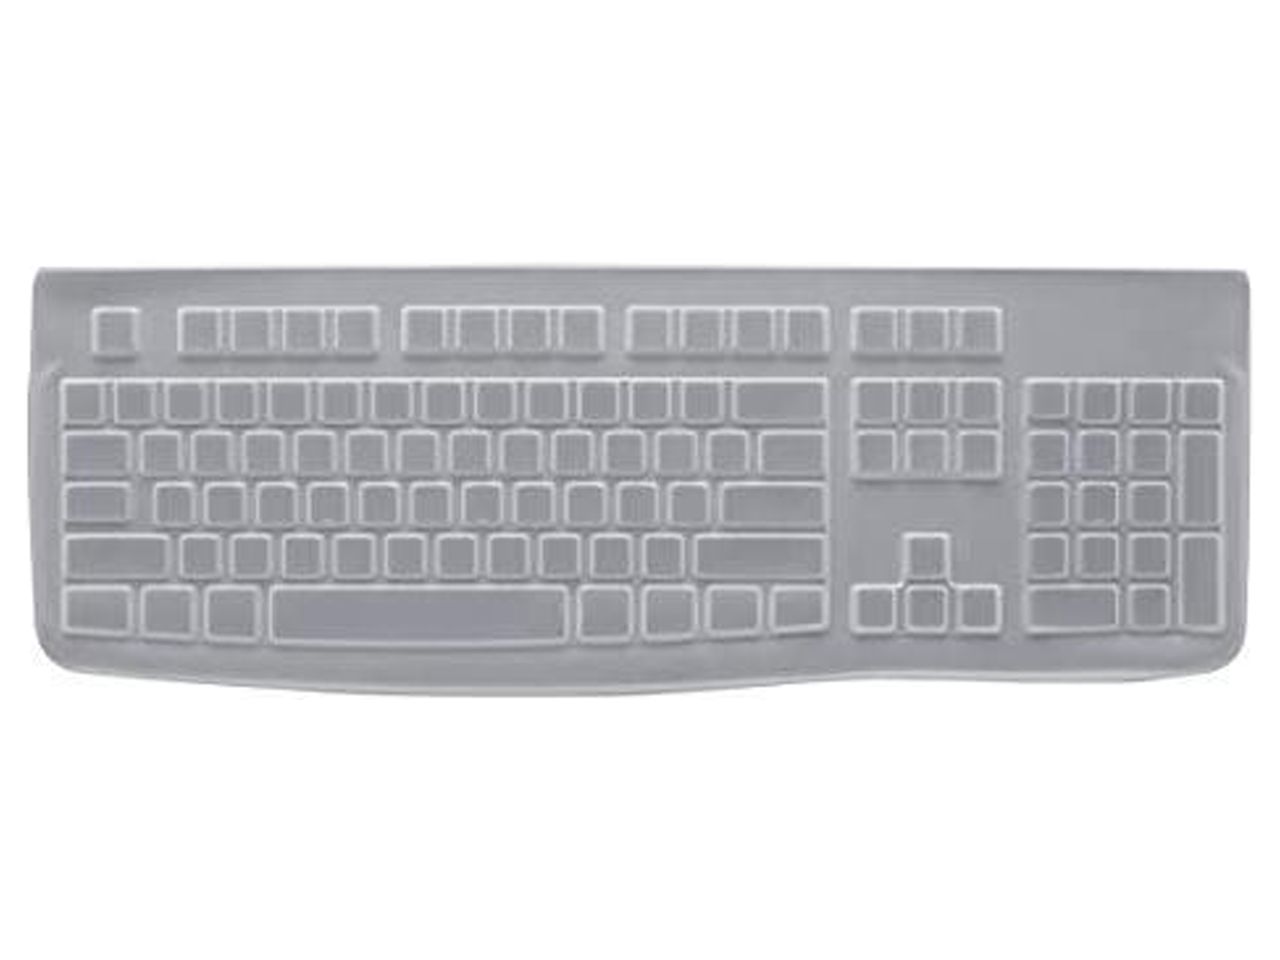 Logitech Protective Covers for K120 Keyboard - Silicone - image 4 of 5